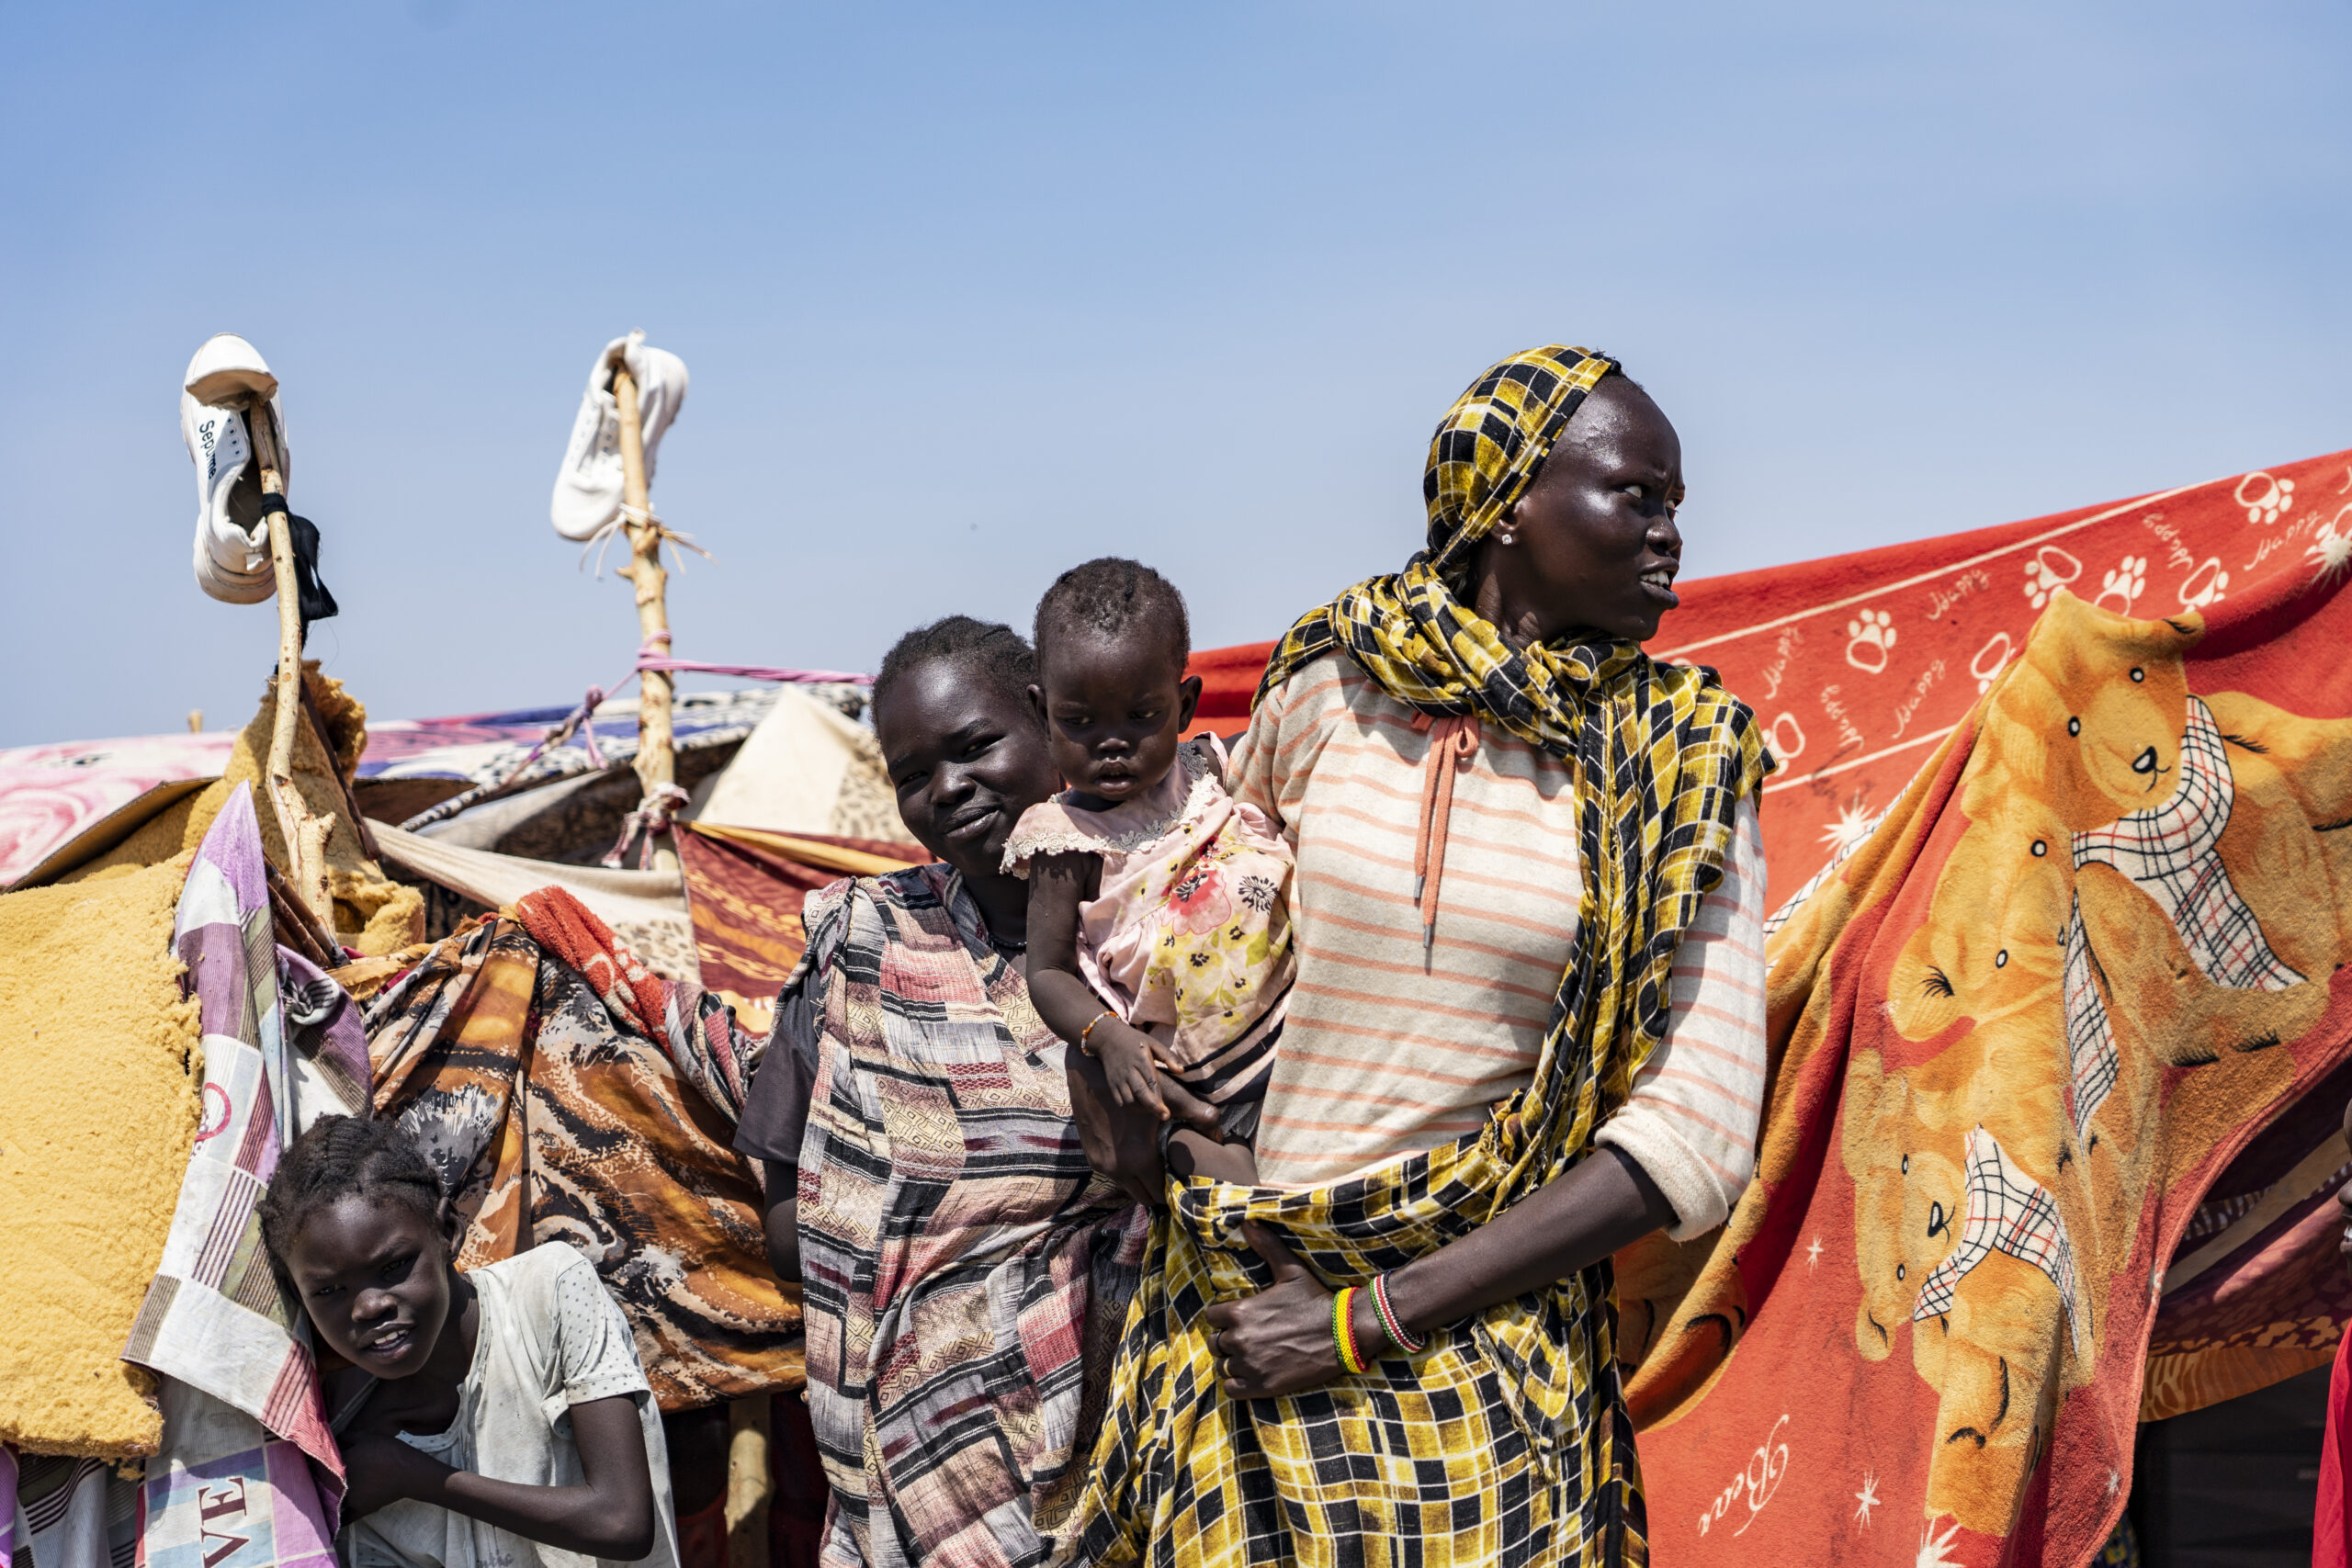 Refugee women hold baby outside their tent in refugee camp in Renk, South Sudan